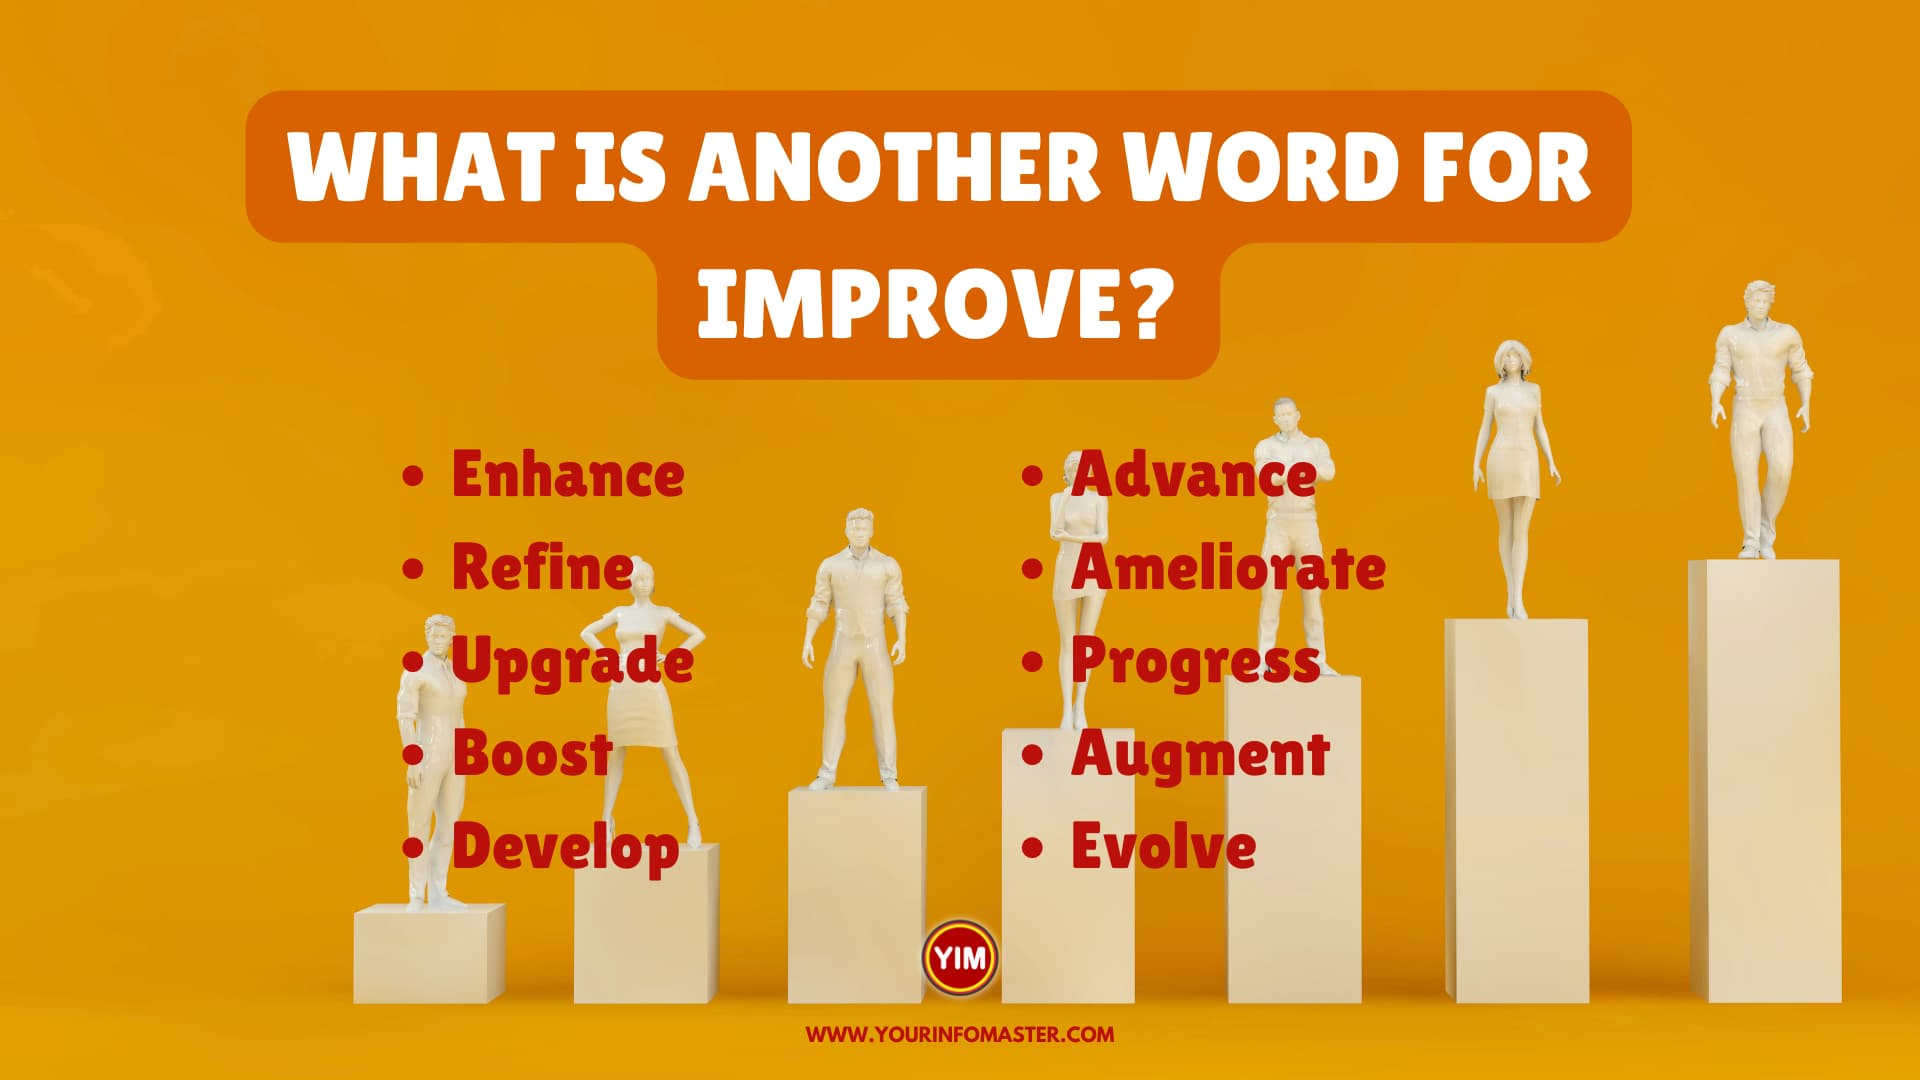 What is another word for Improve